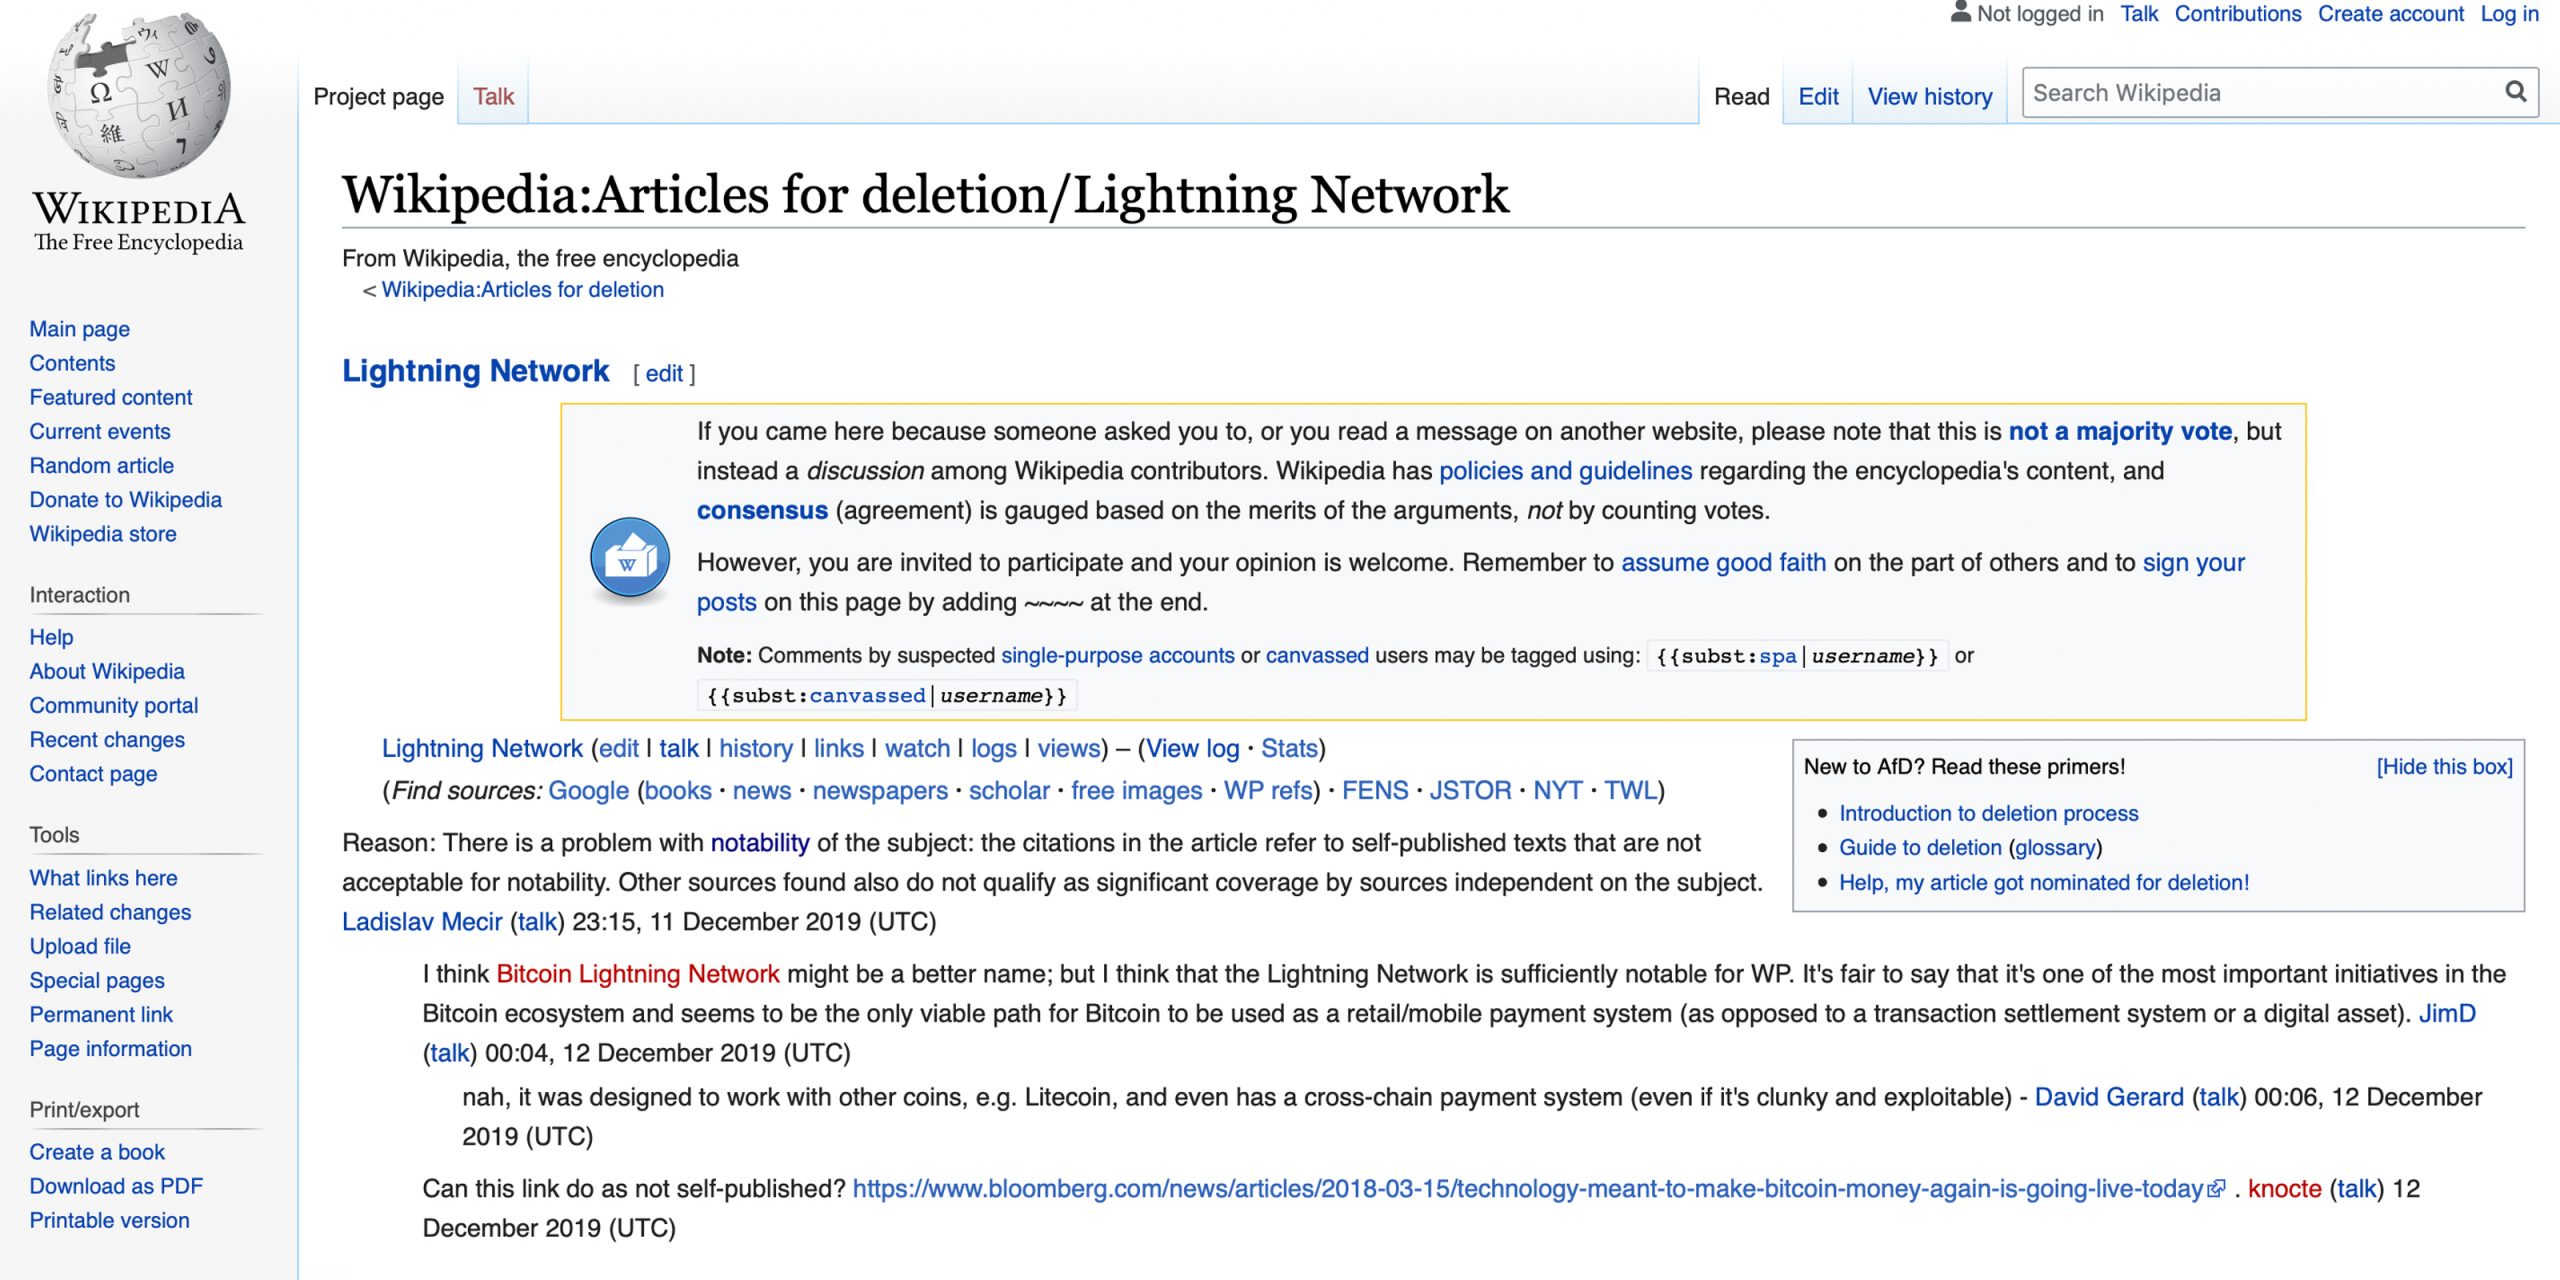 Lightning Network Wiki Page Faces Removal for Lack of Notability